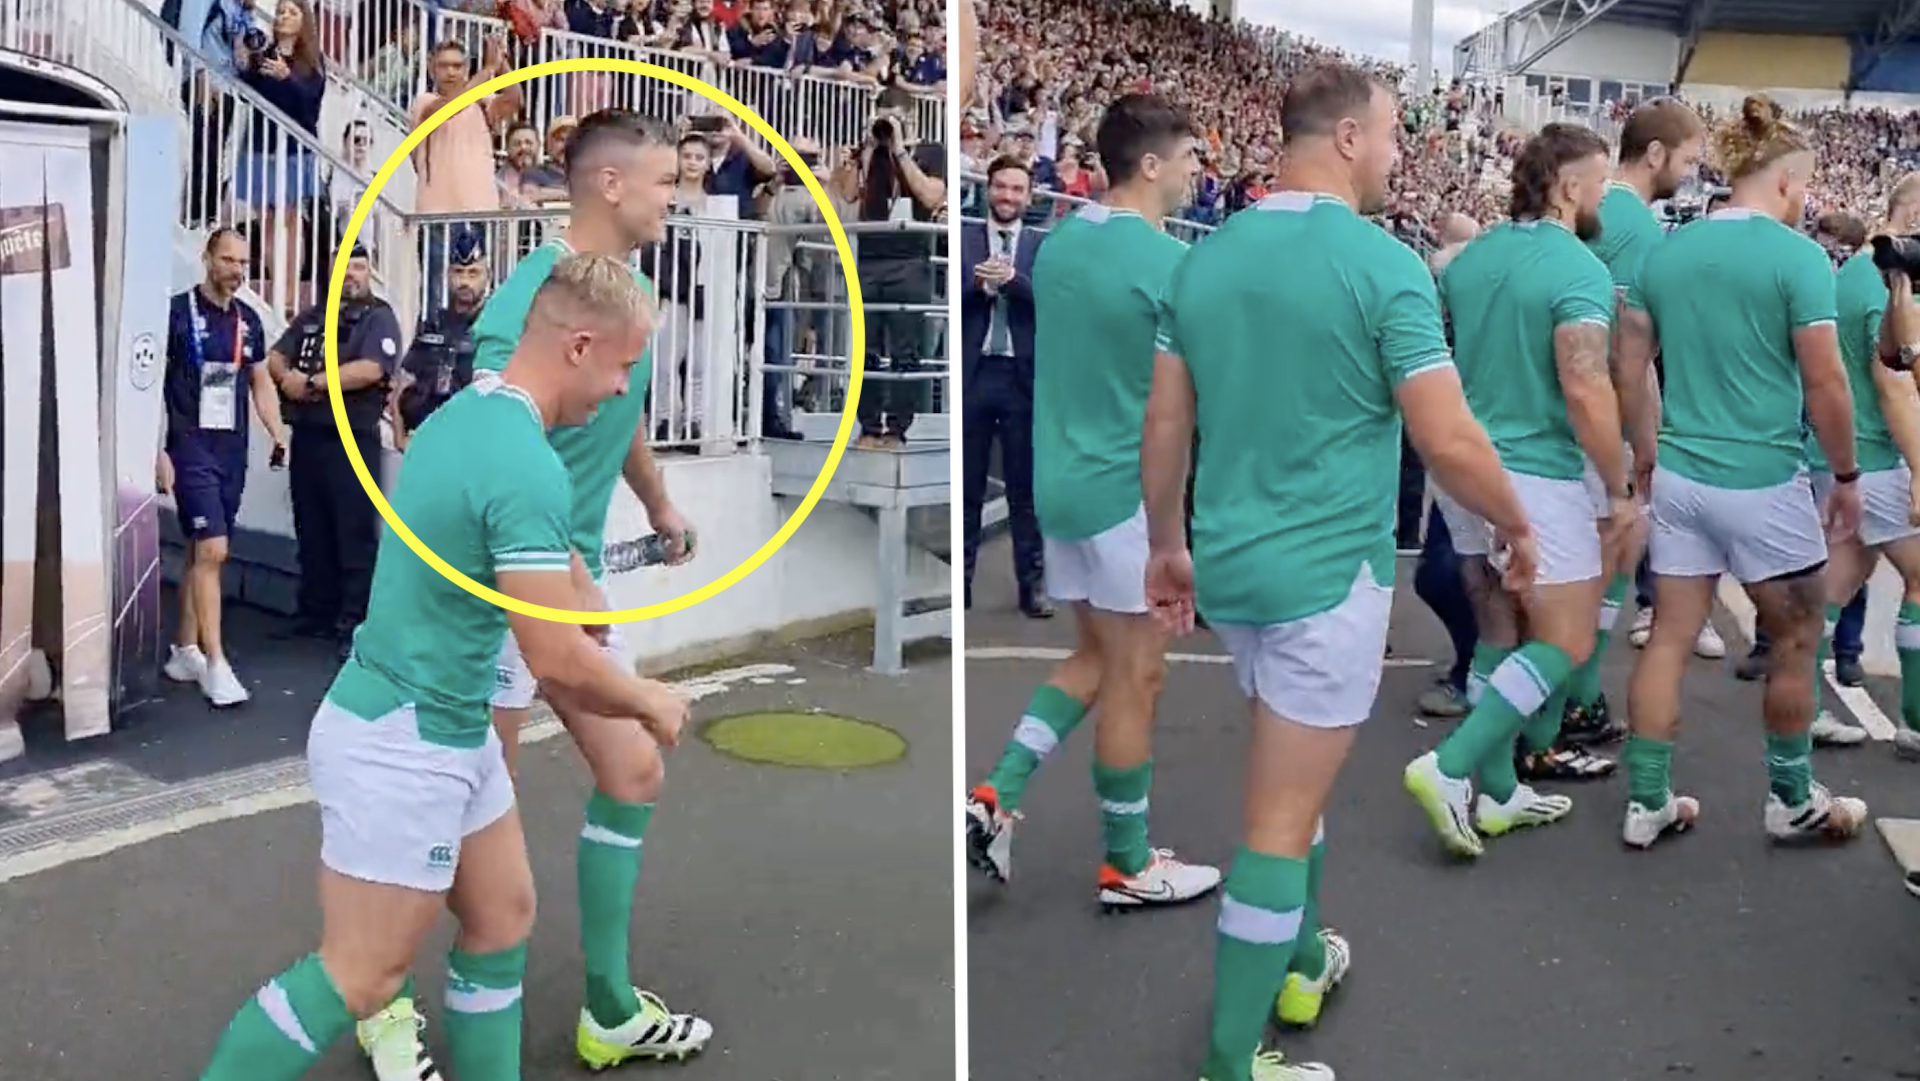 Johnny Sexton brutally mocks his own teammate in front of thousands